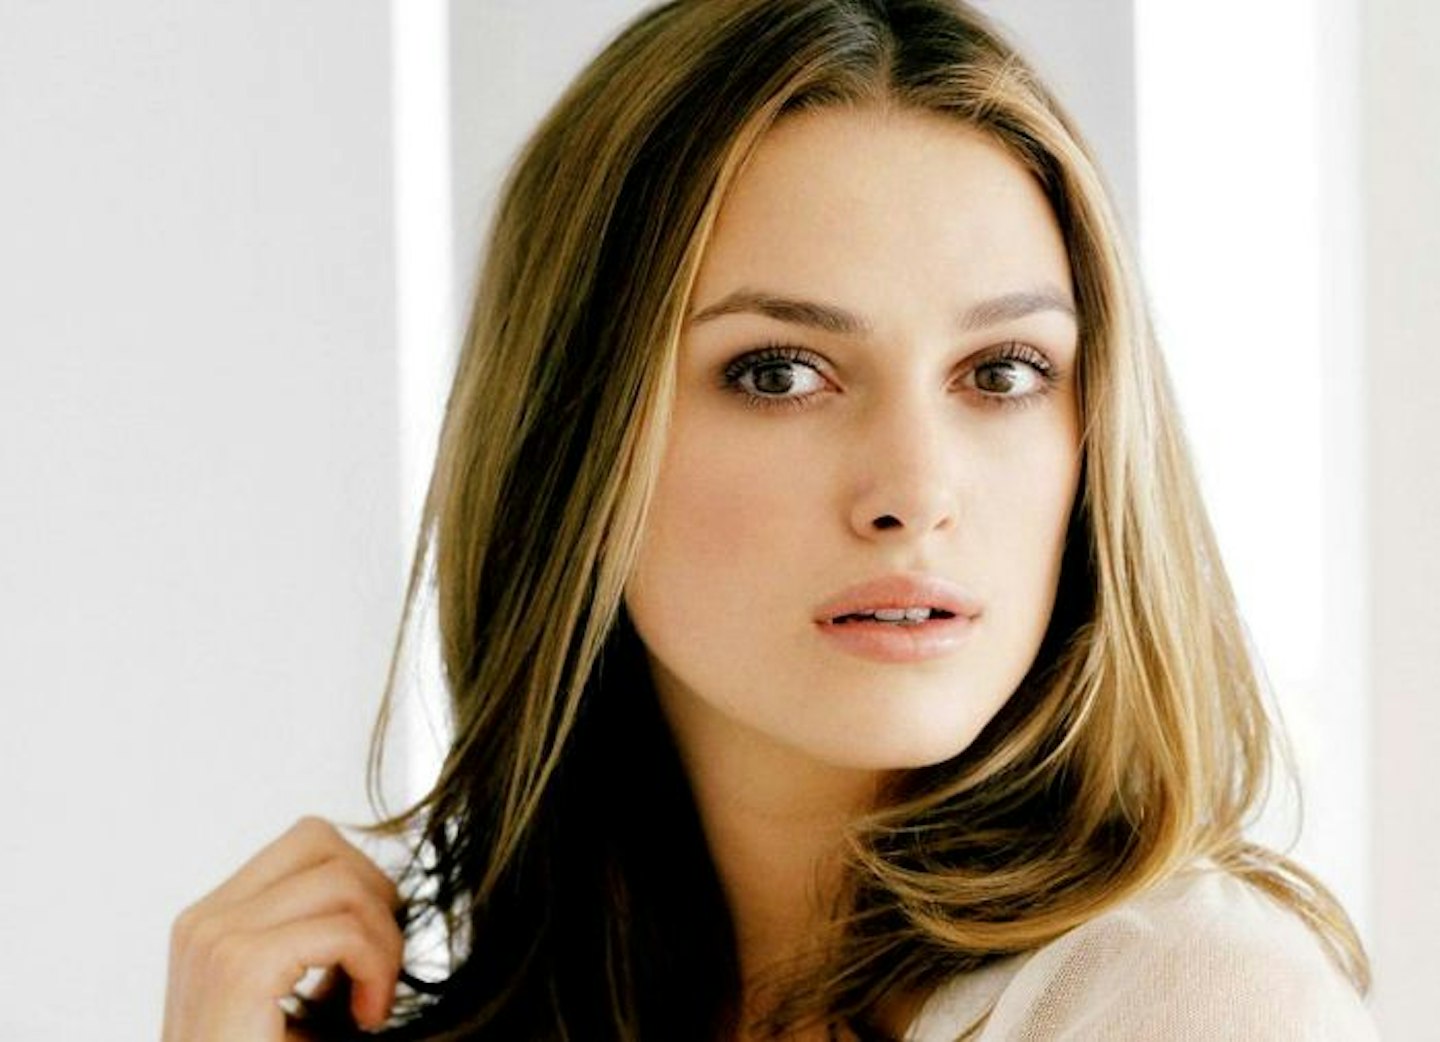 Keira Knightley Wants To Play The Imitation Game